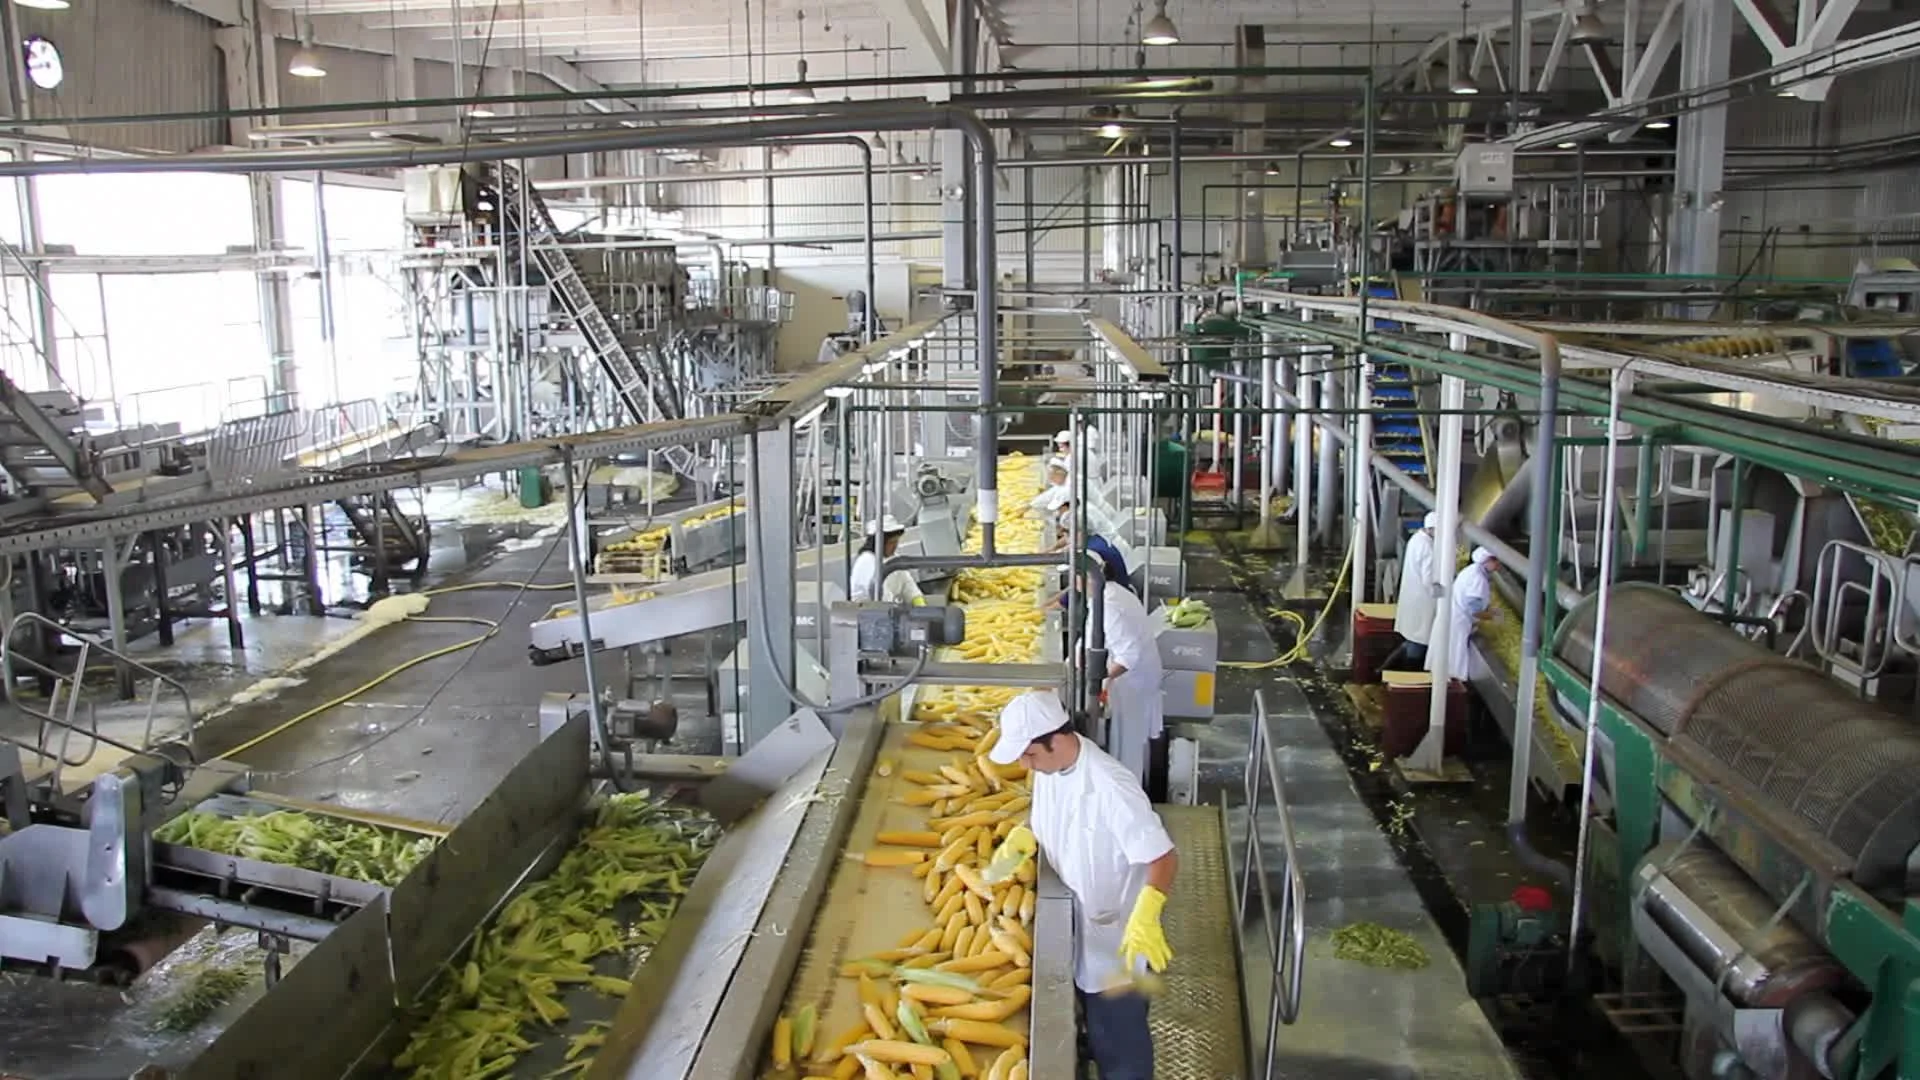 Food Production Industries